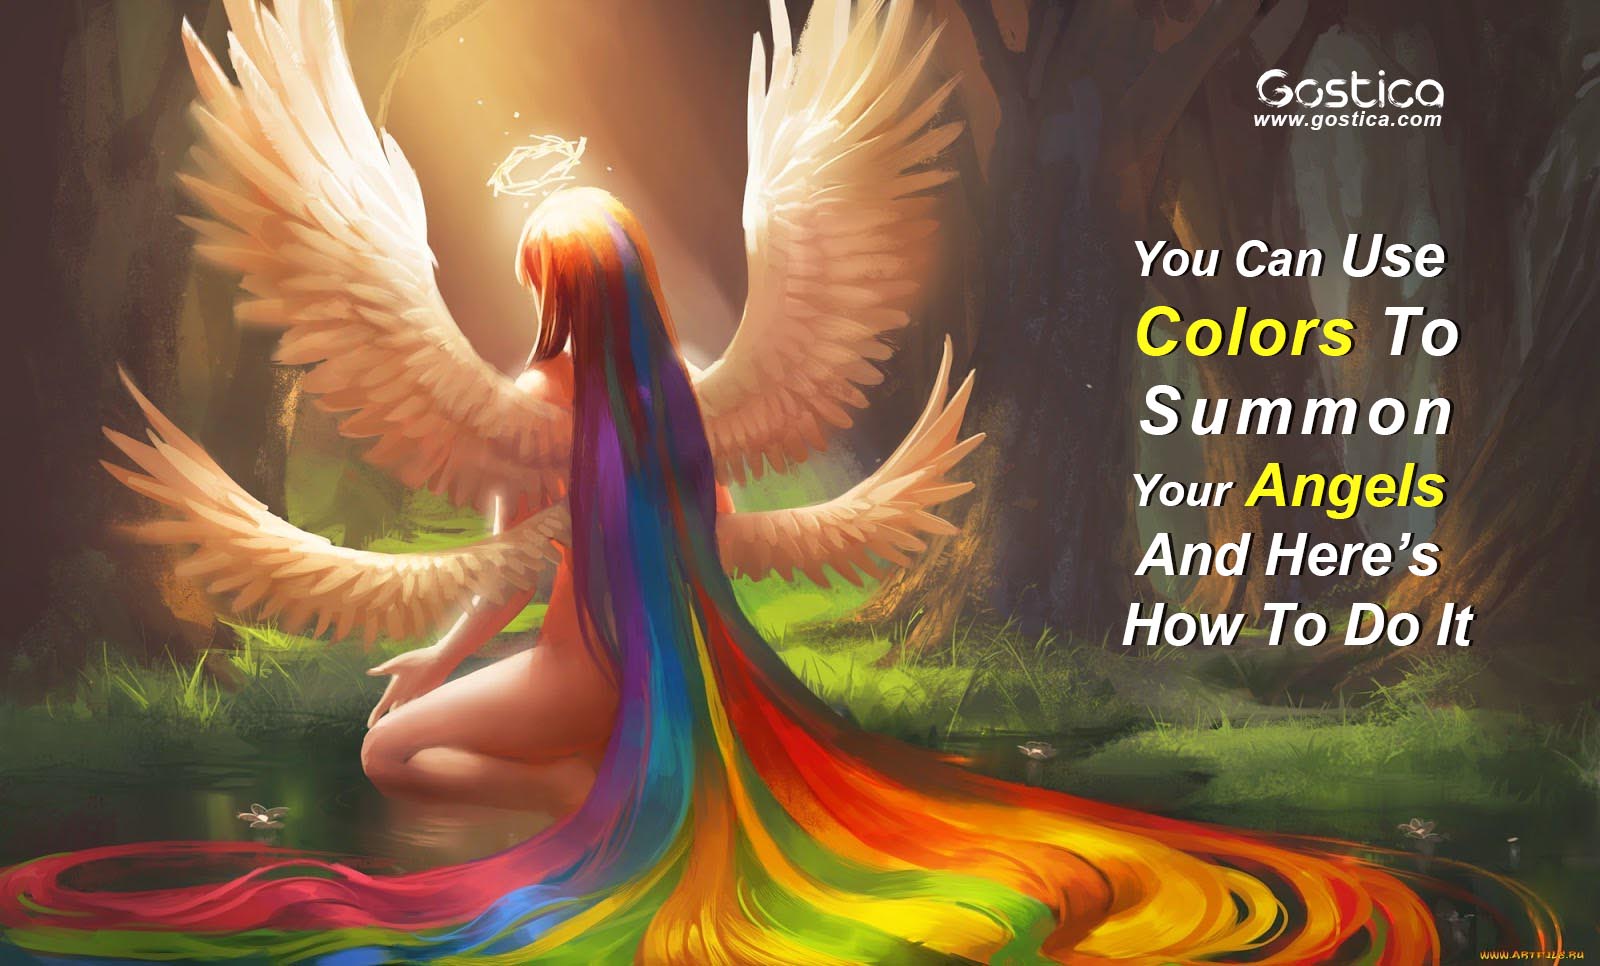 You-Can-Use-Colors-To-Summon-Your-Angels-And-Here’s-How-To-Do-It.jpg